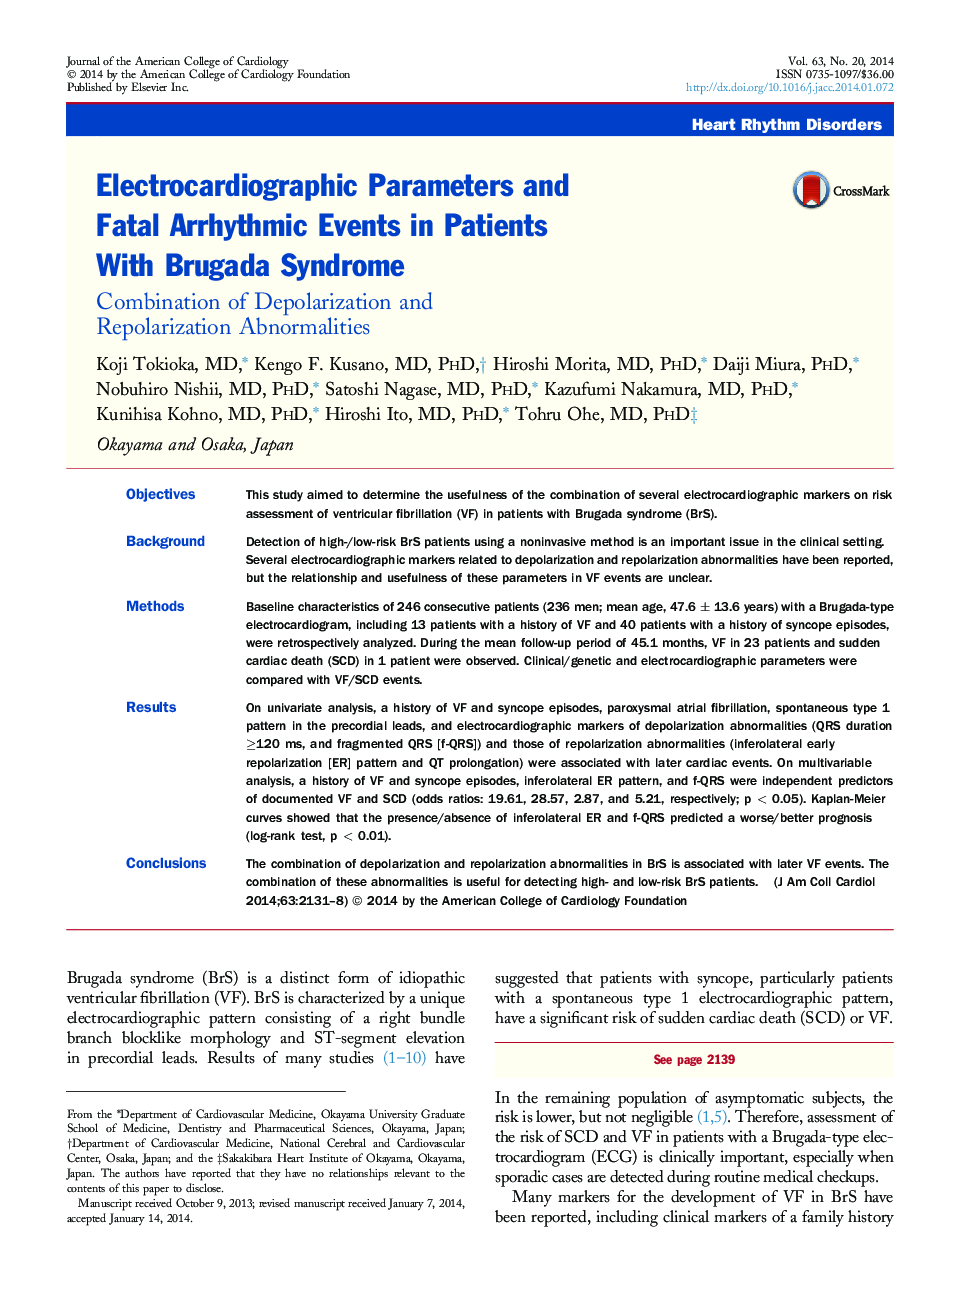 Electrocardiographic Parameters and Fatal Arrhythmic Events in Patients With Brugada Syndrome: Combination of Depolarization and Repolarization Abnormalities